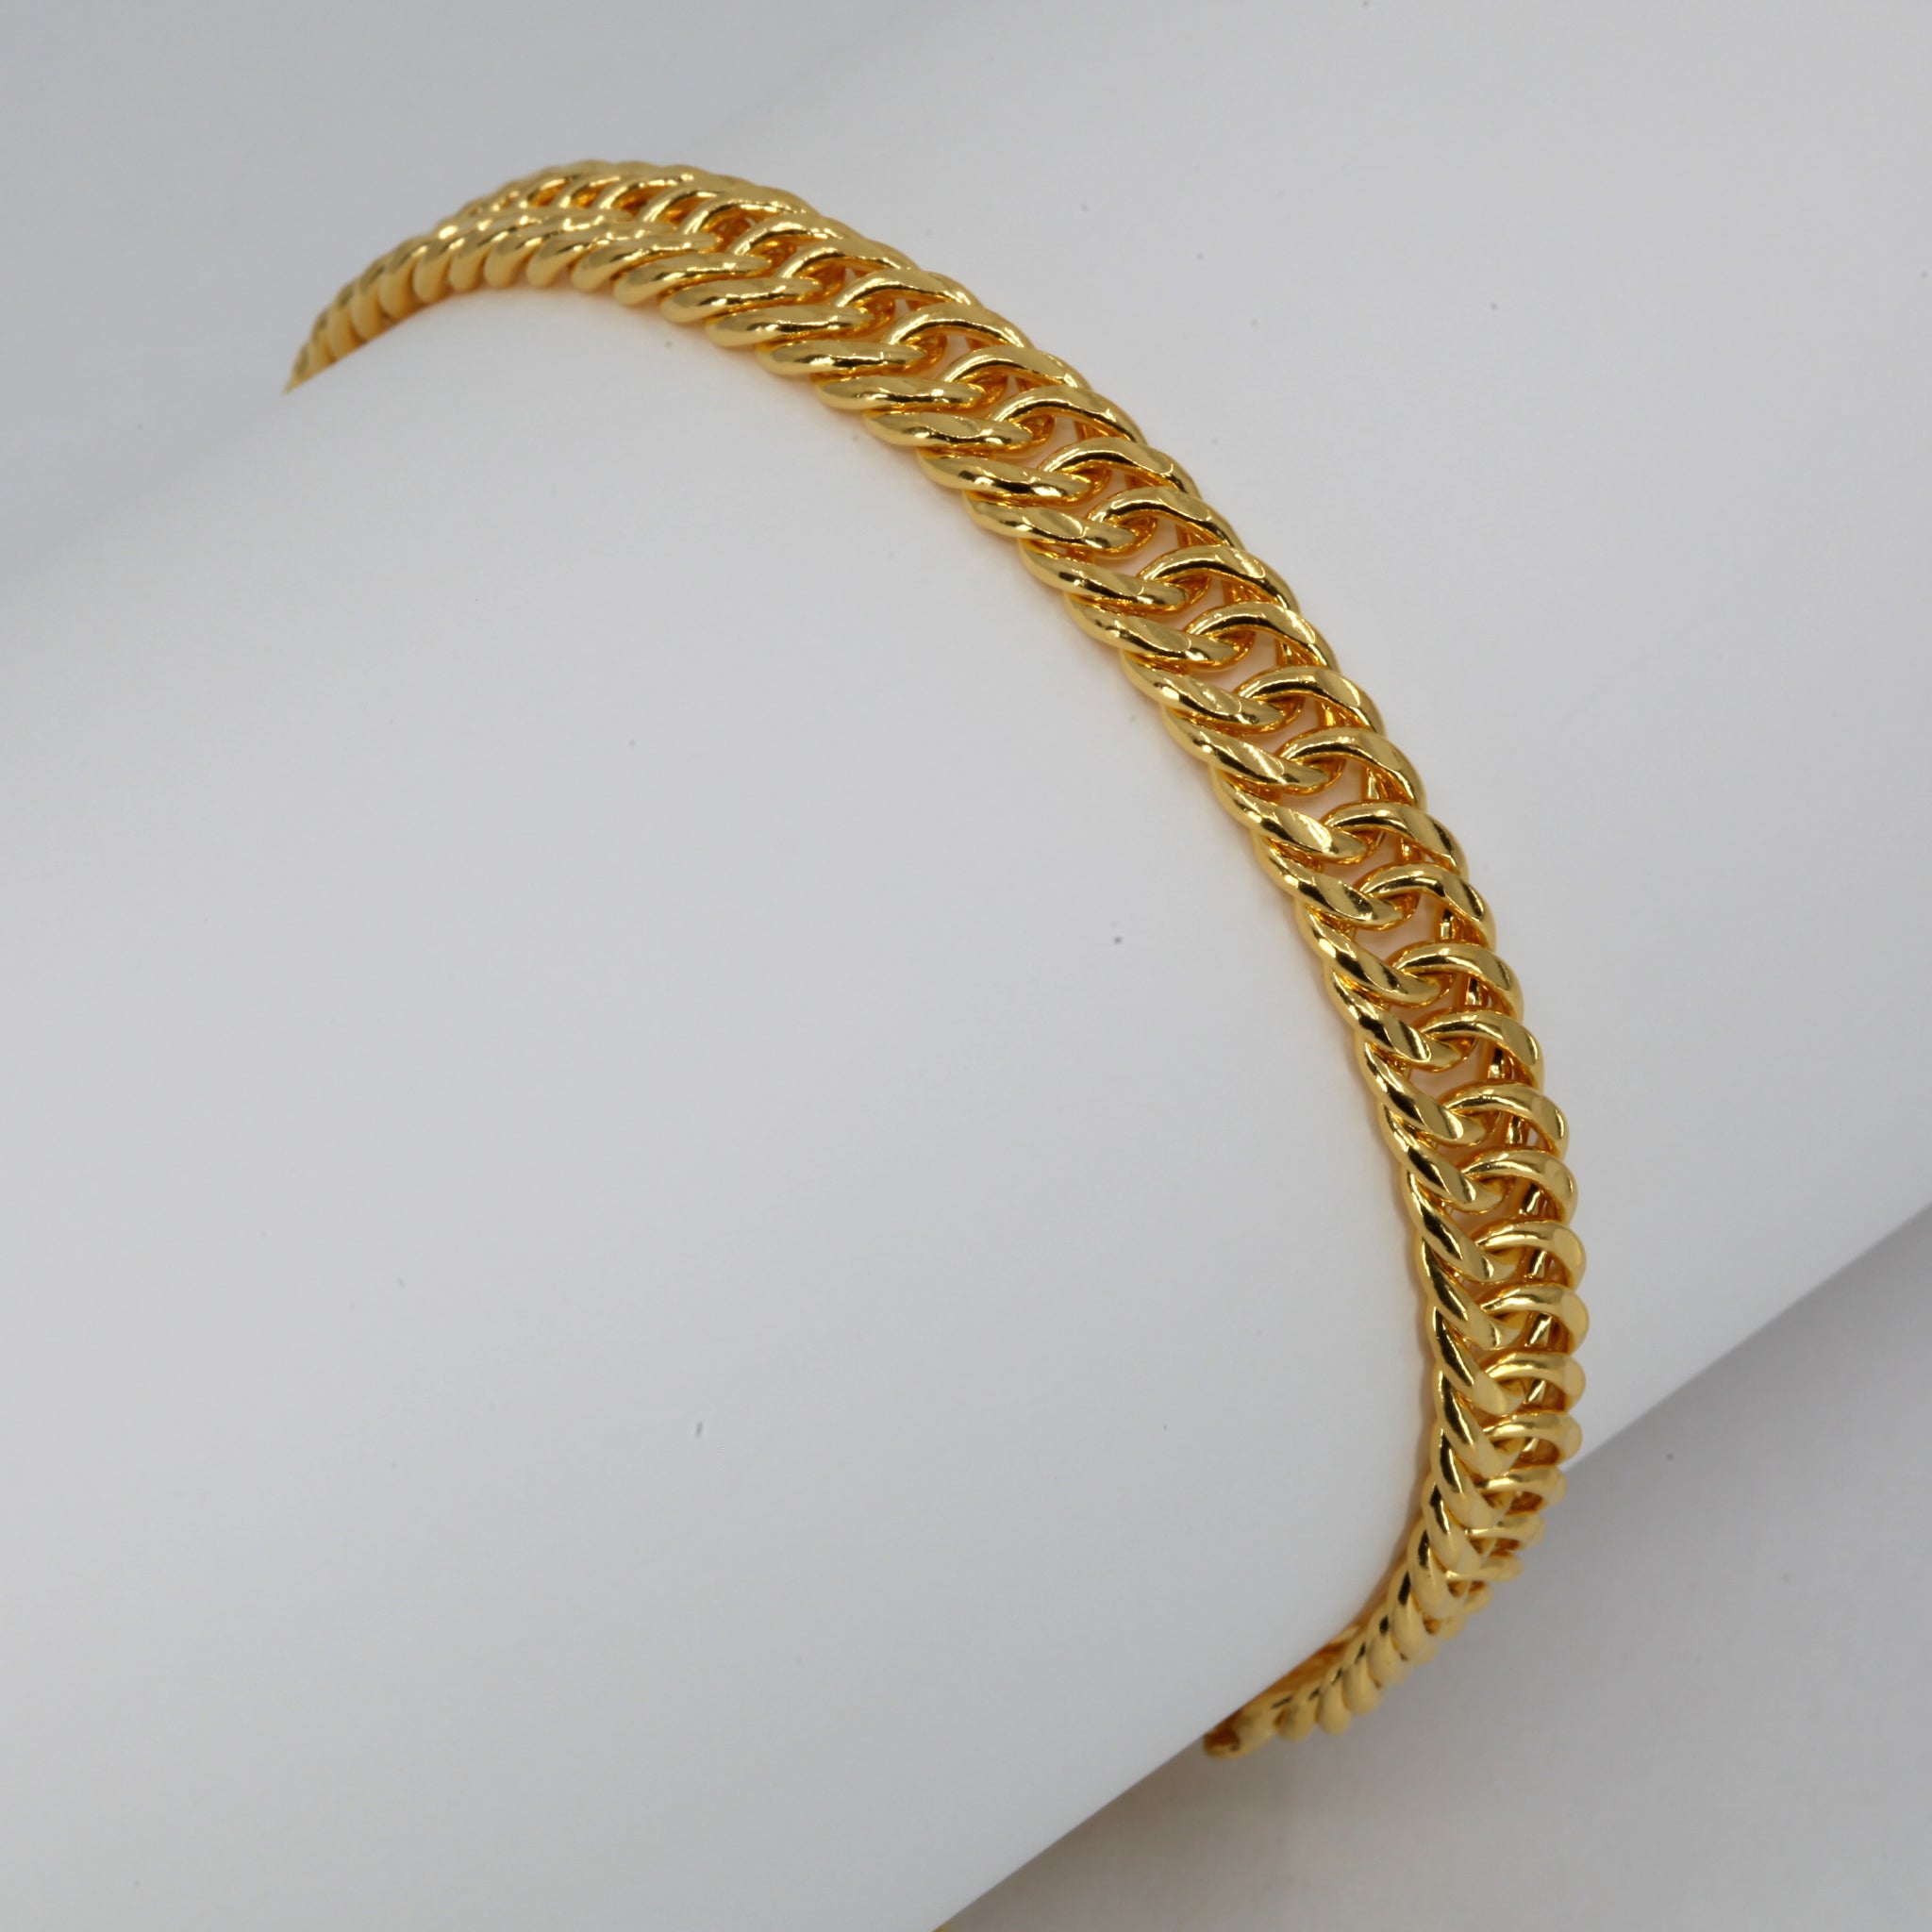 Custom Solid 22k 92.5% Gold 124g Wide 7.2mm Hammered Twisted Viking and  Ancient Rome Bracelet Durable Bangle Thick 7mm Women Men 24k - Etsy